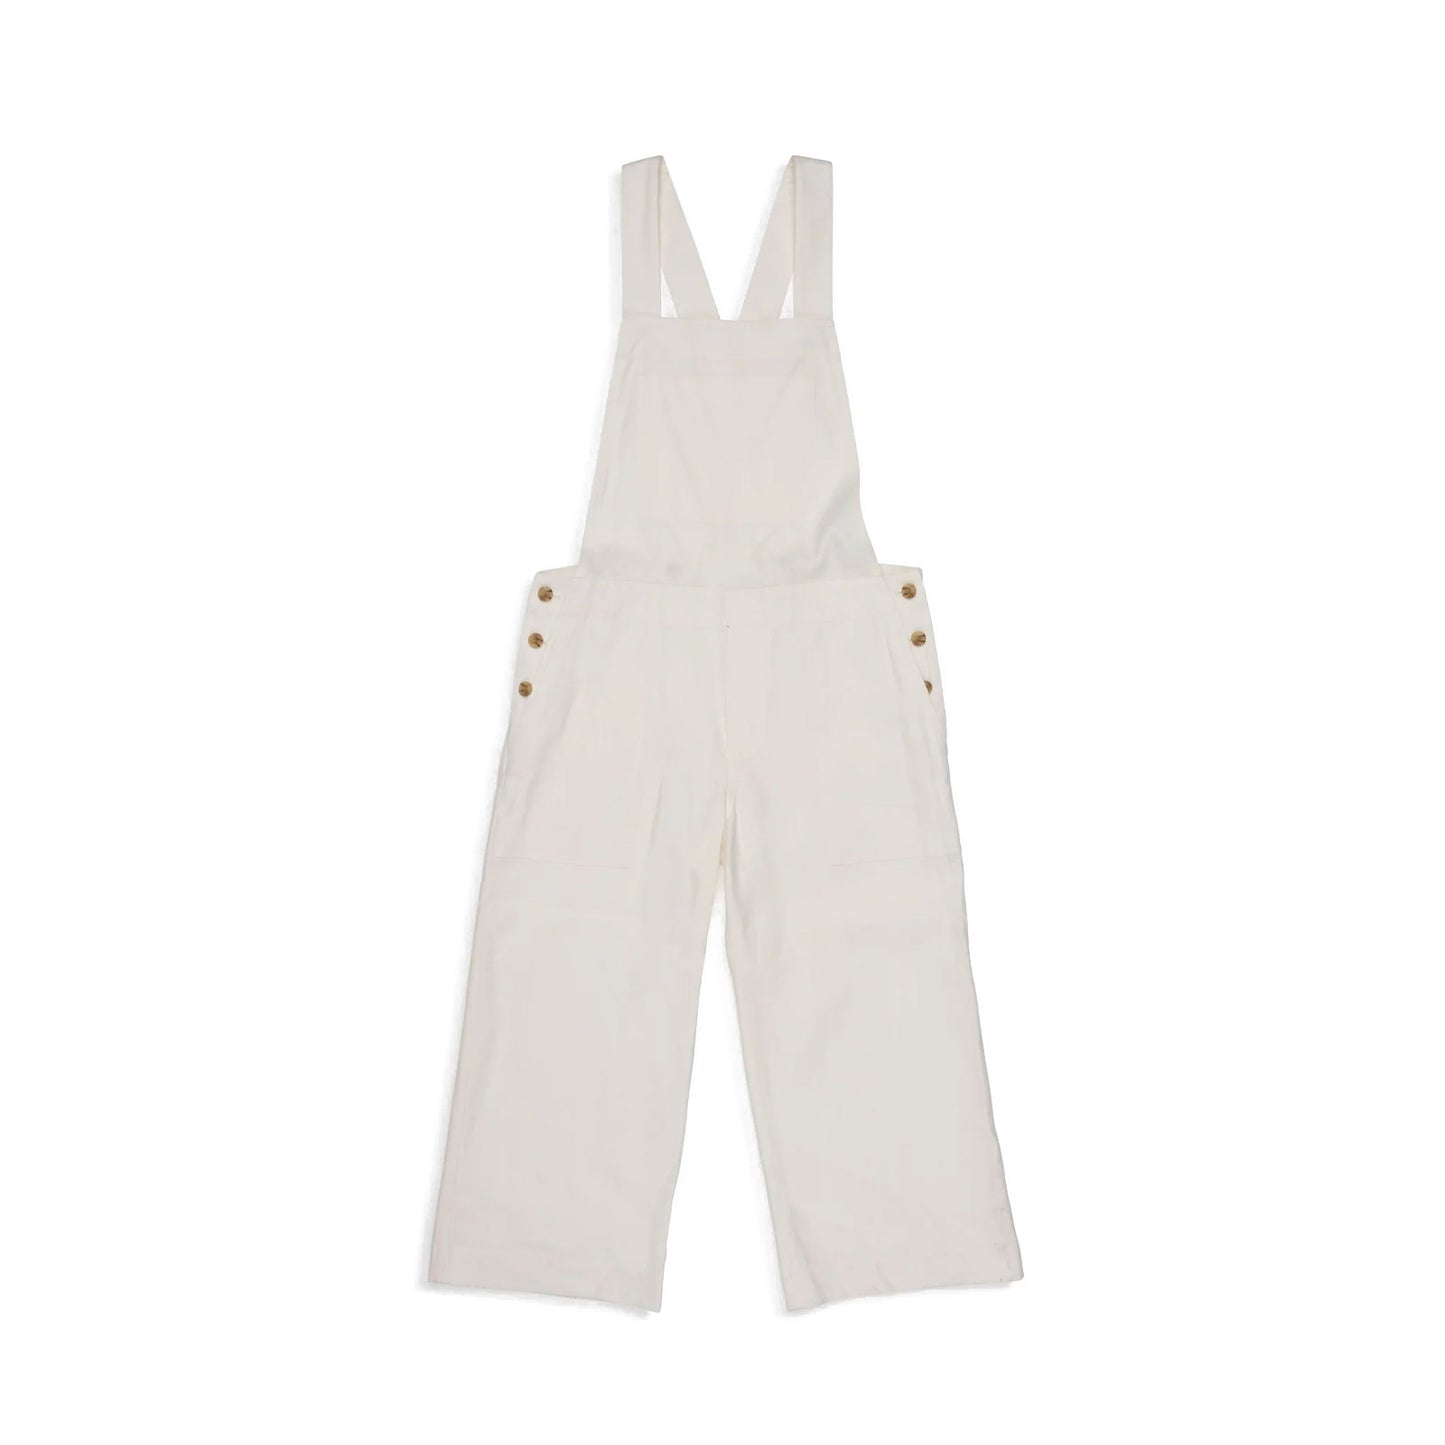 Apron Overall in White